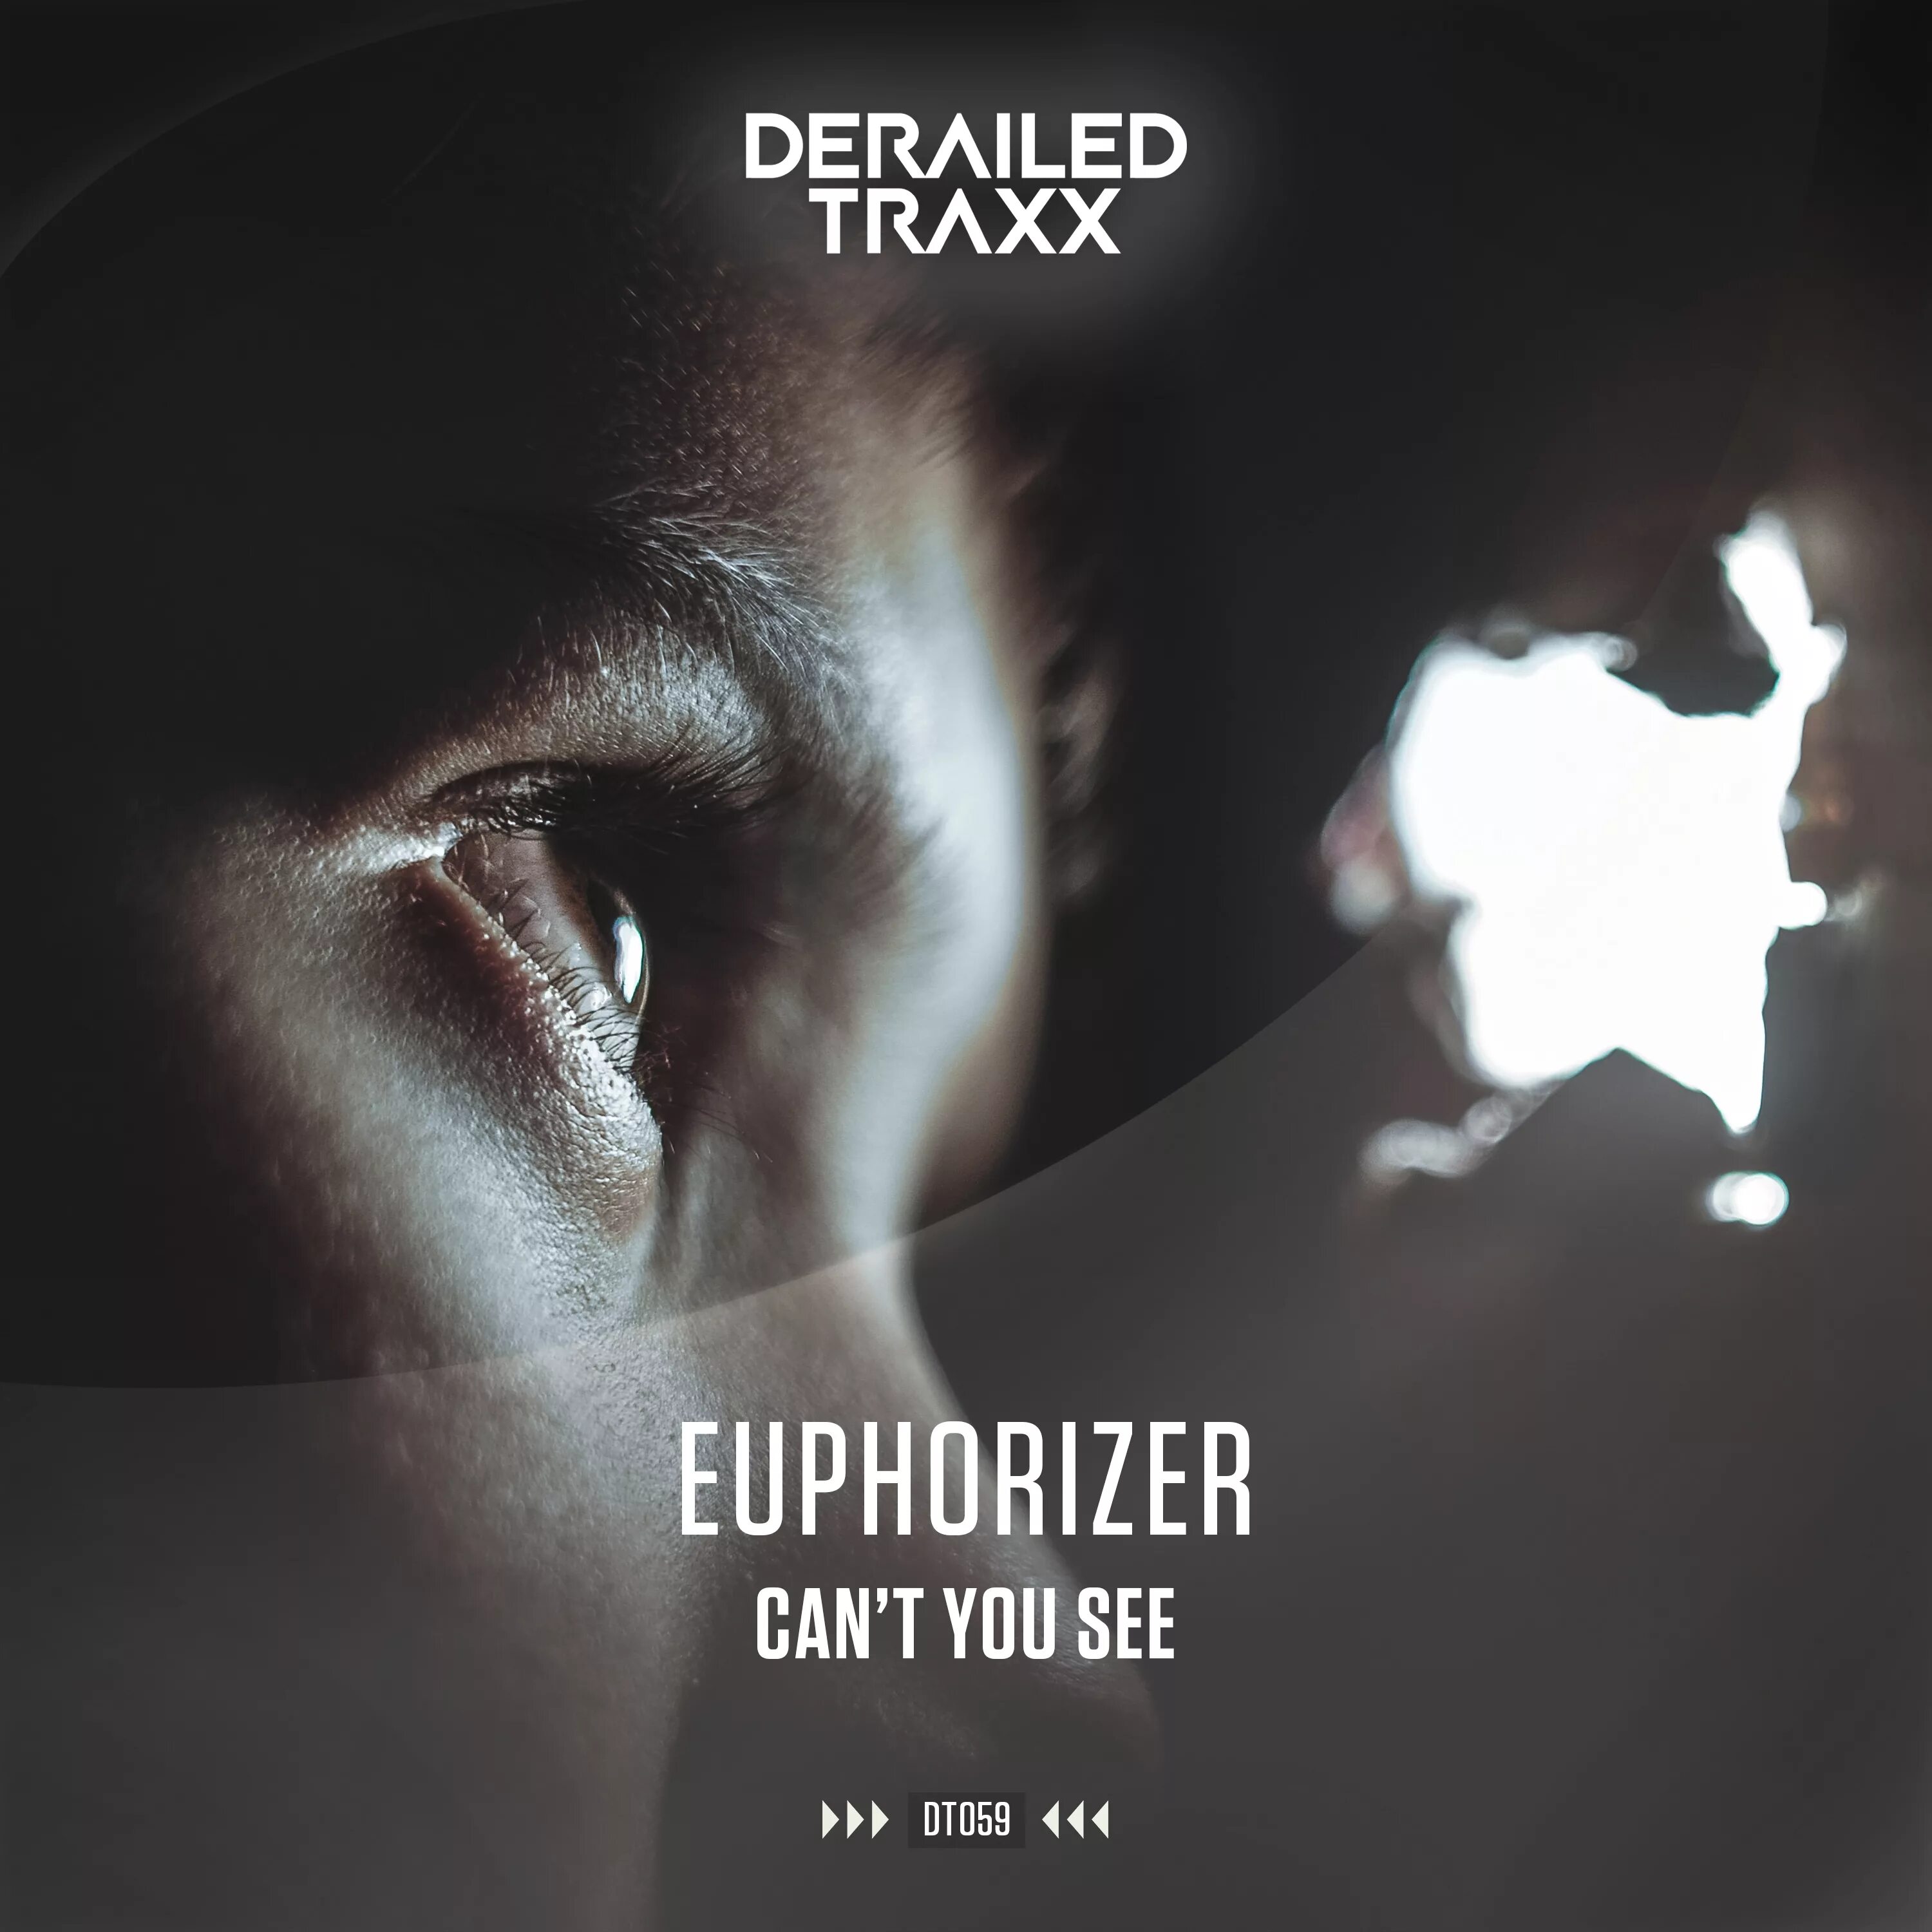 Euphorizer - can't you see текст песни.